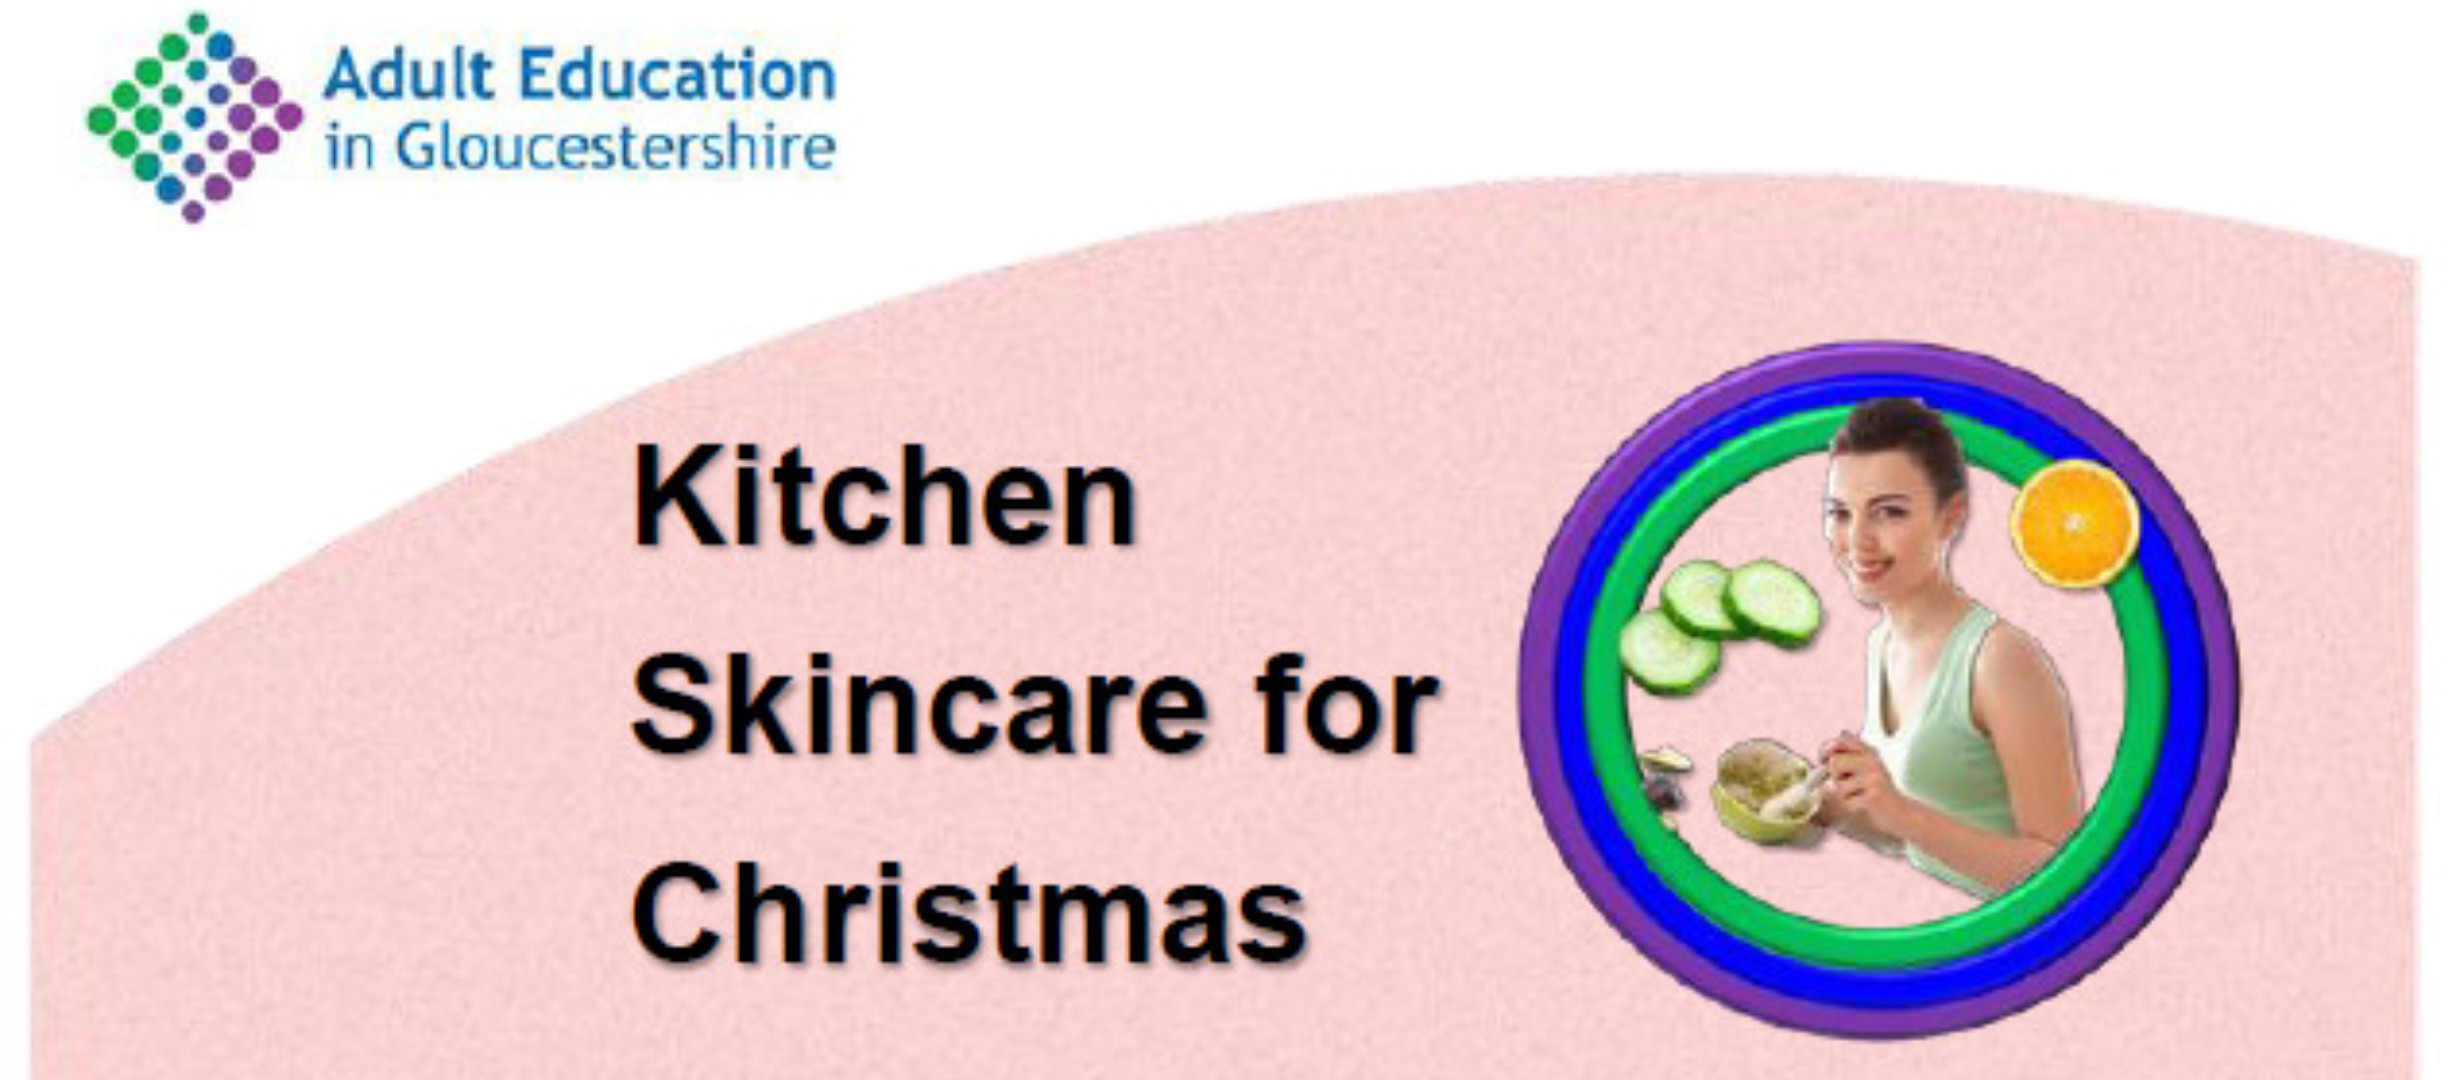 Adult education logo, text 'kitchen skincare for Christmas'